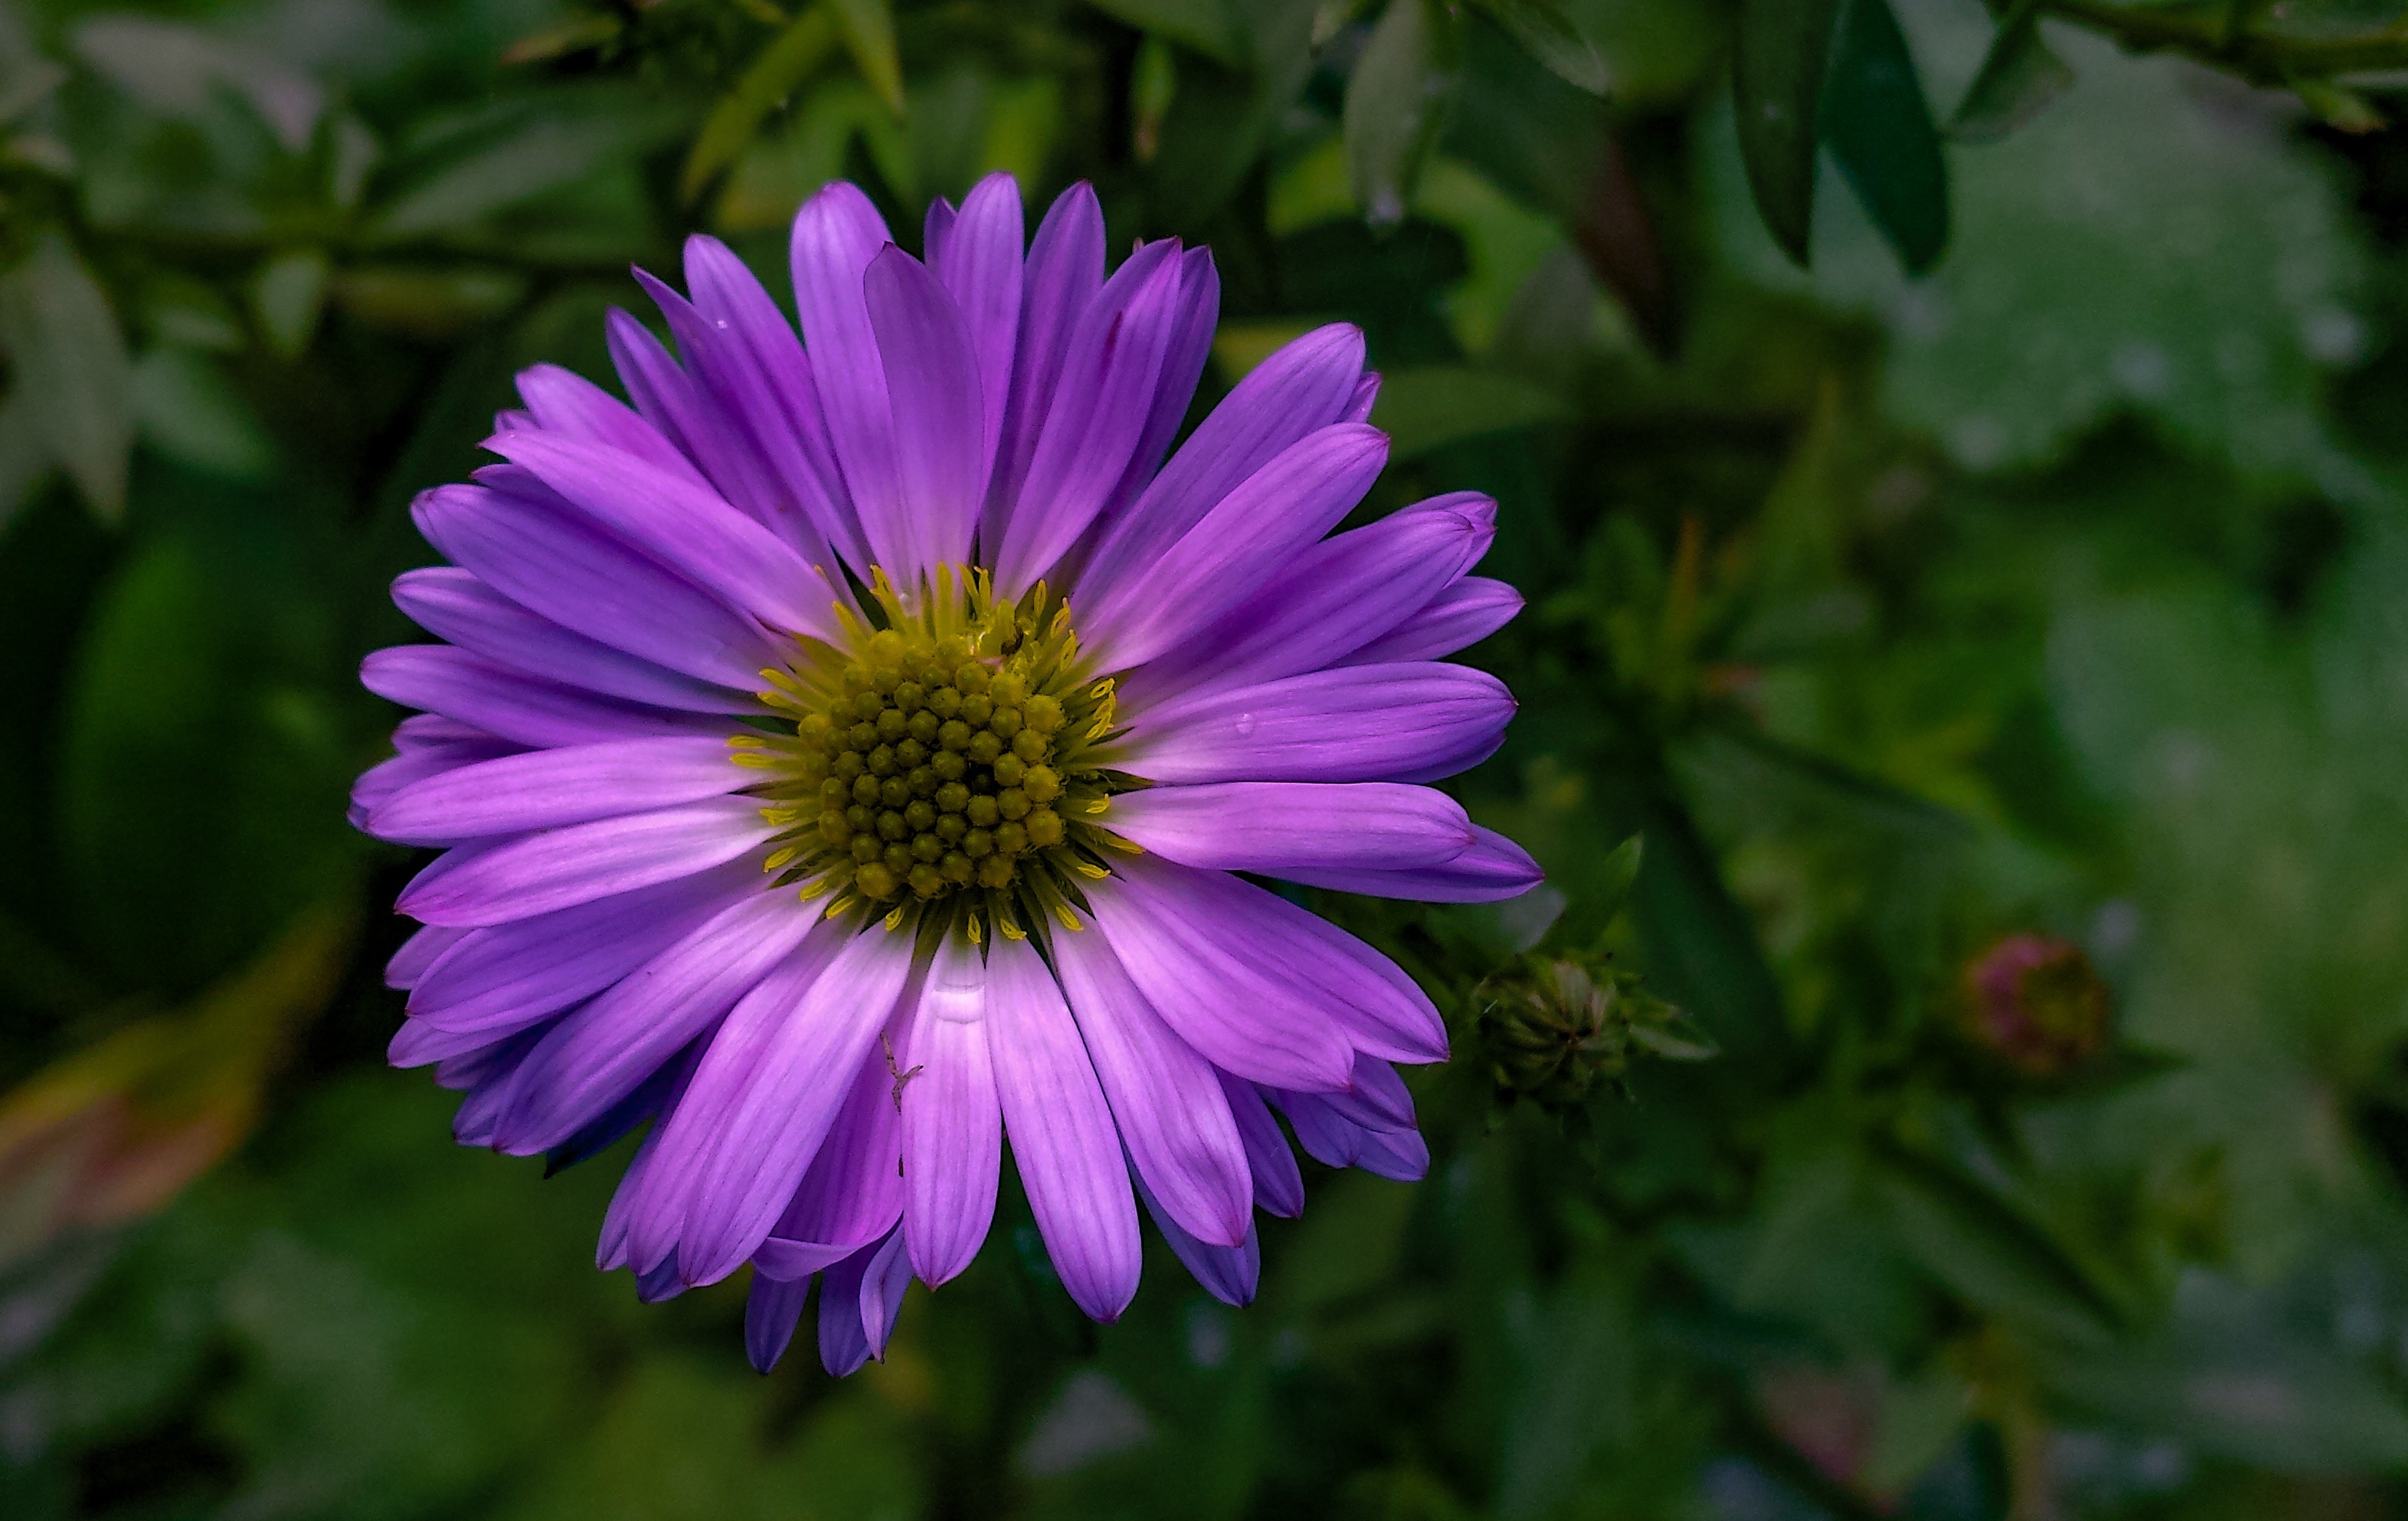 purple and gray flower surrounded by leaves